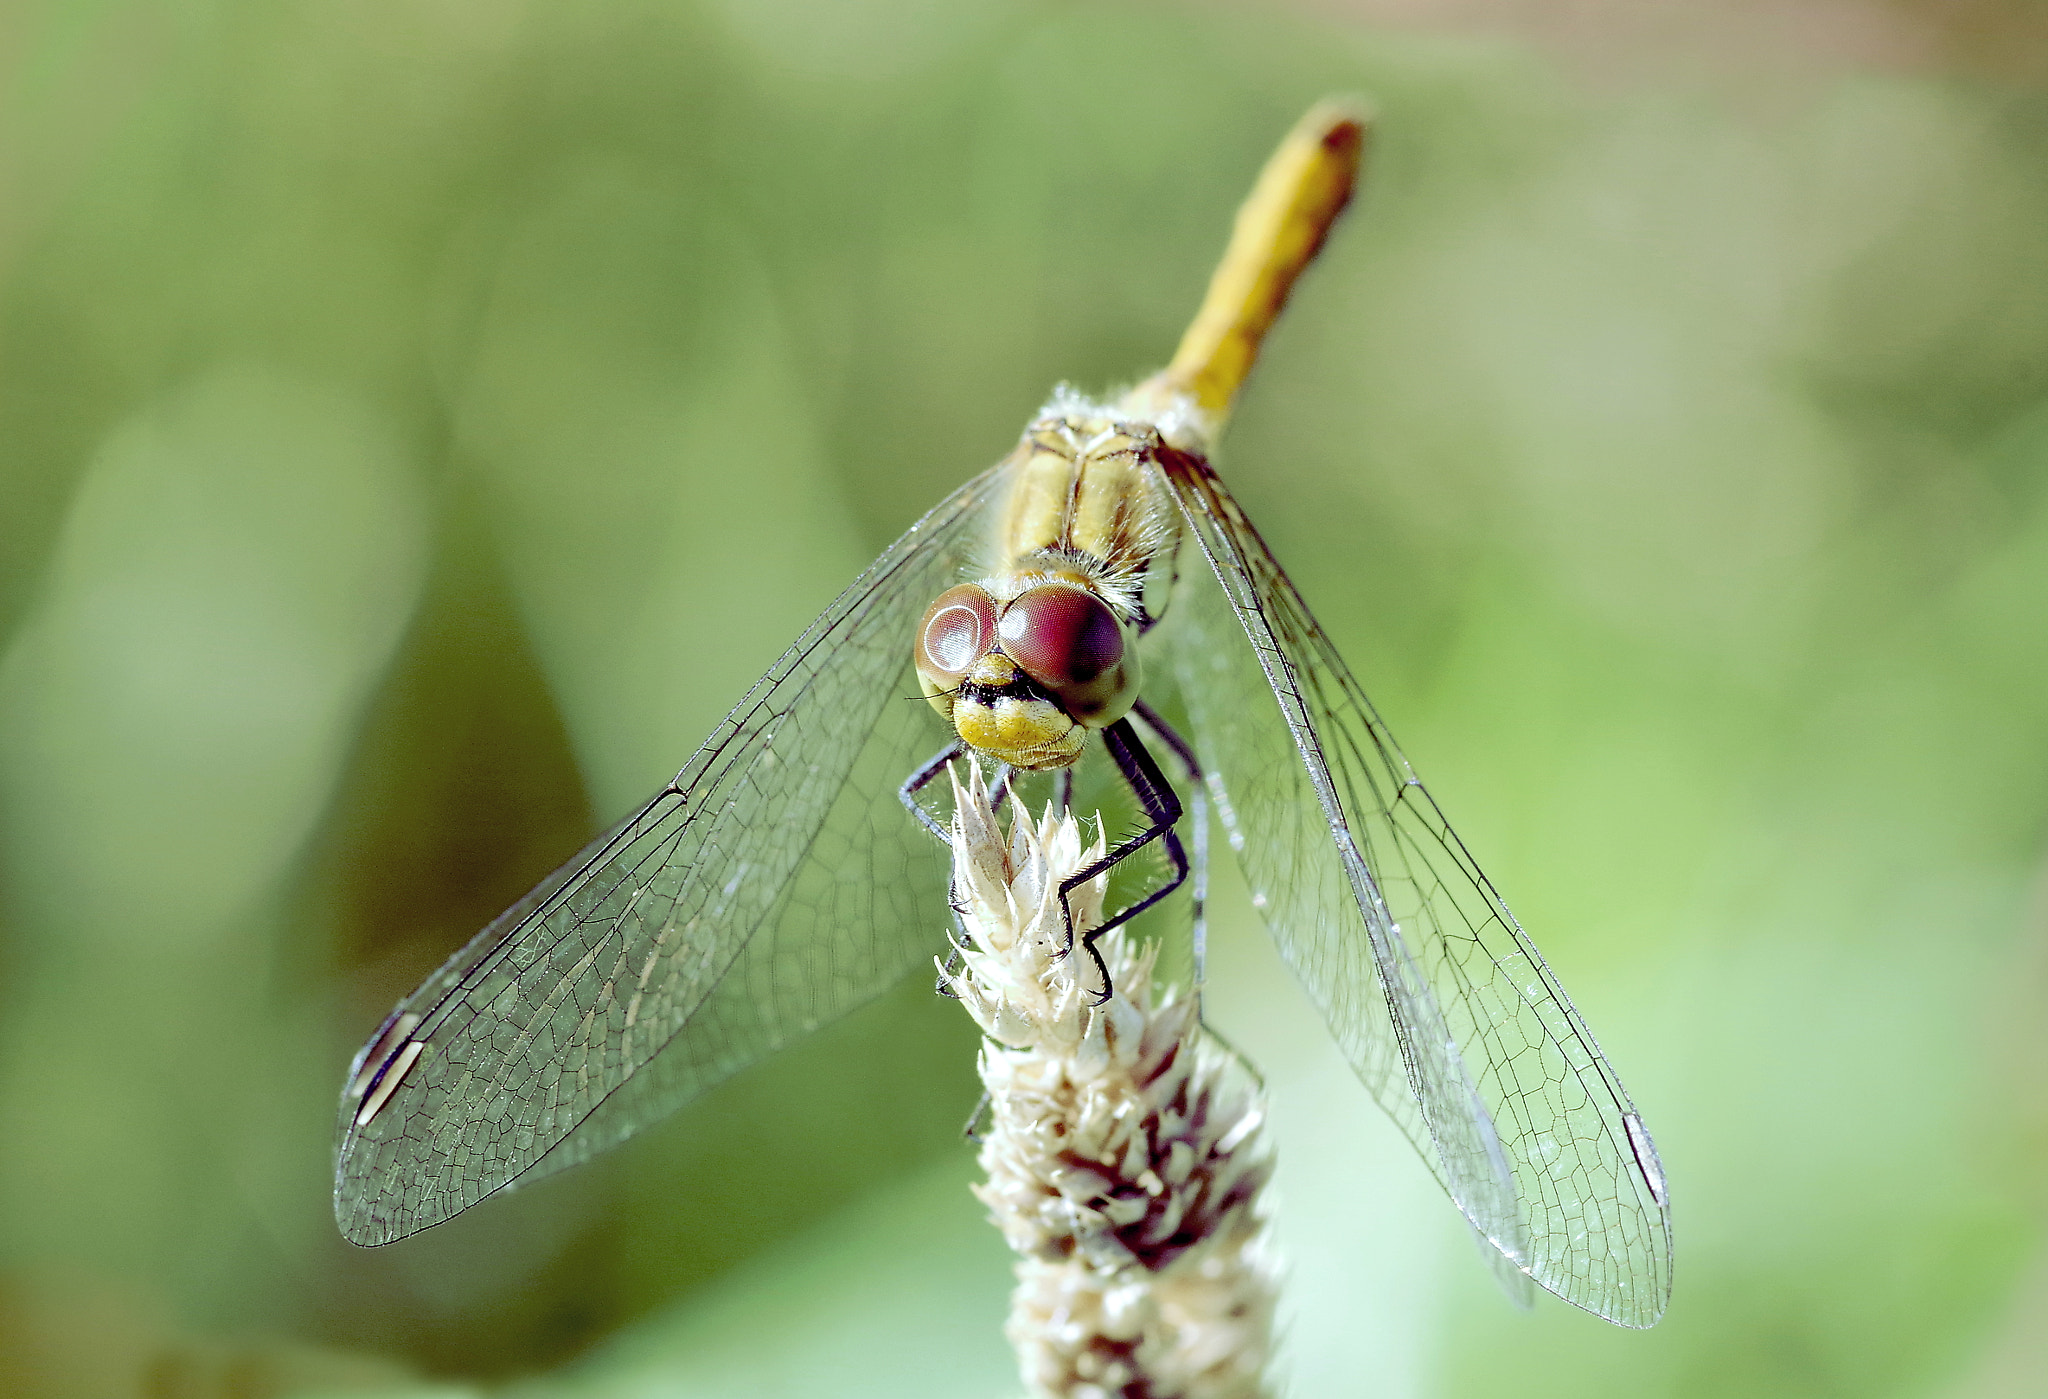 Pentax K-S2 sample photo. Dragonfly photography